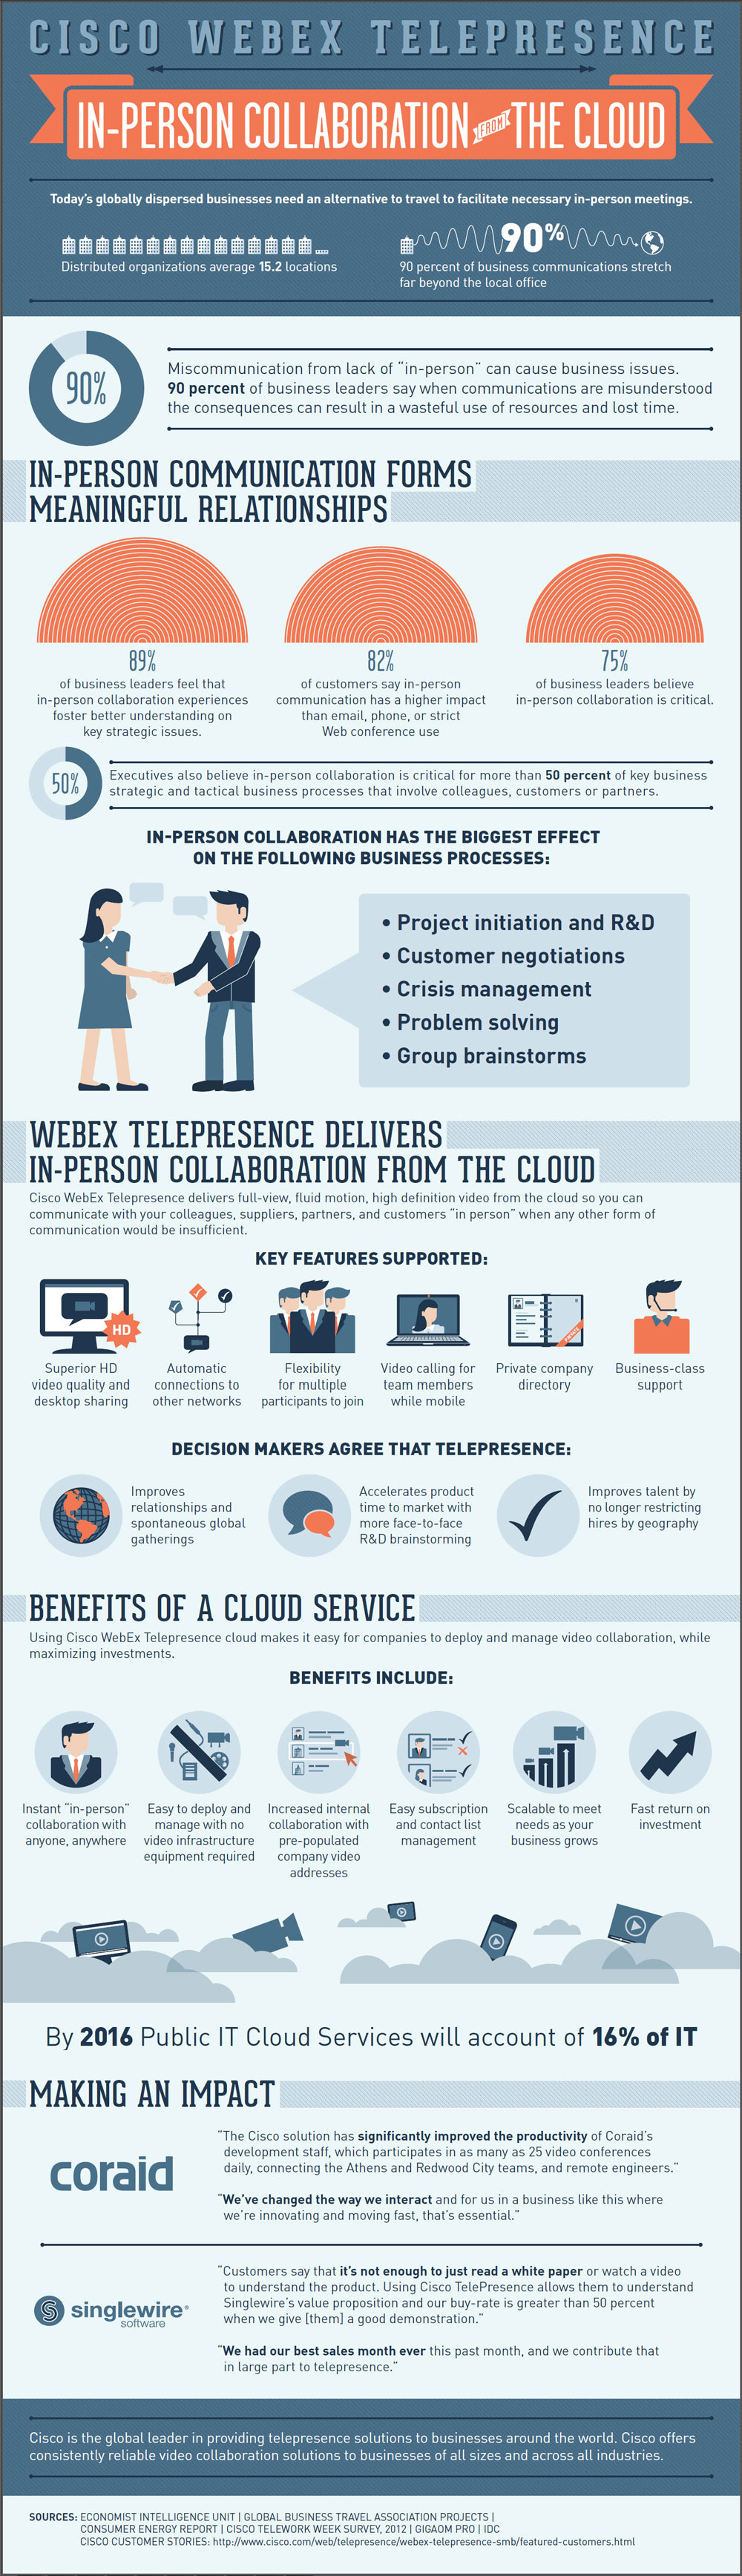 In-Person Collaboration from the Cloud